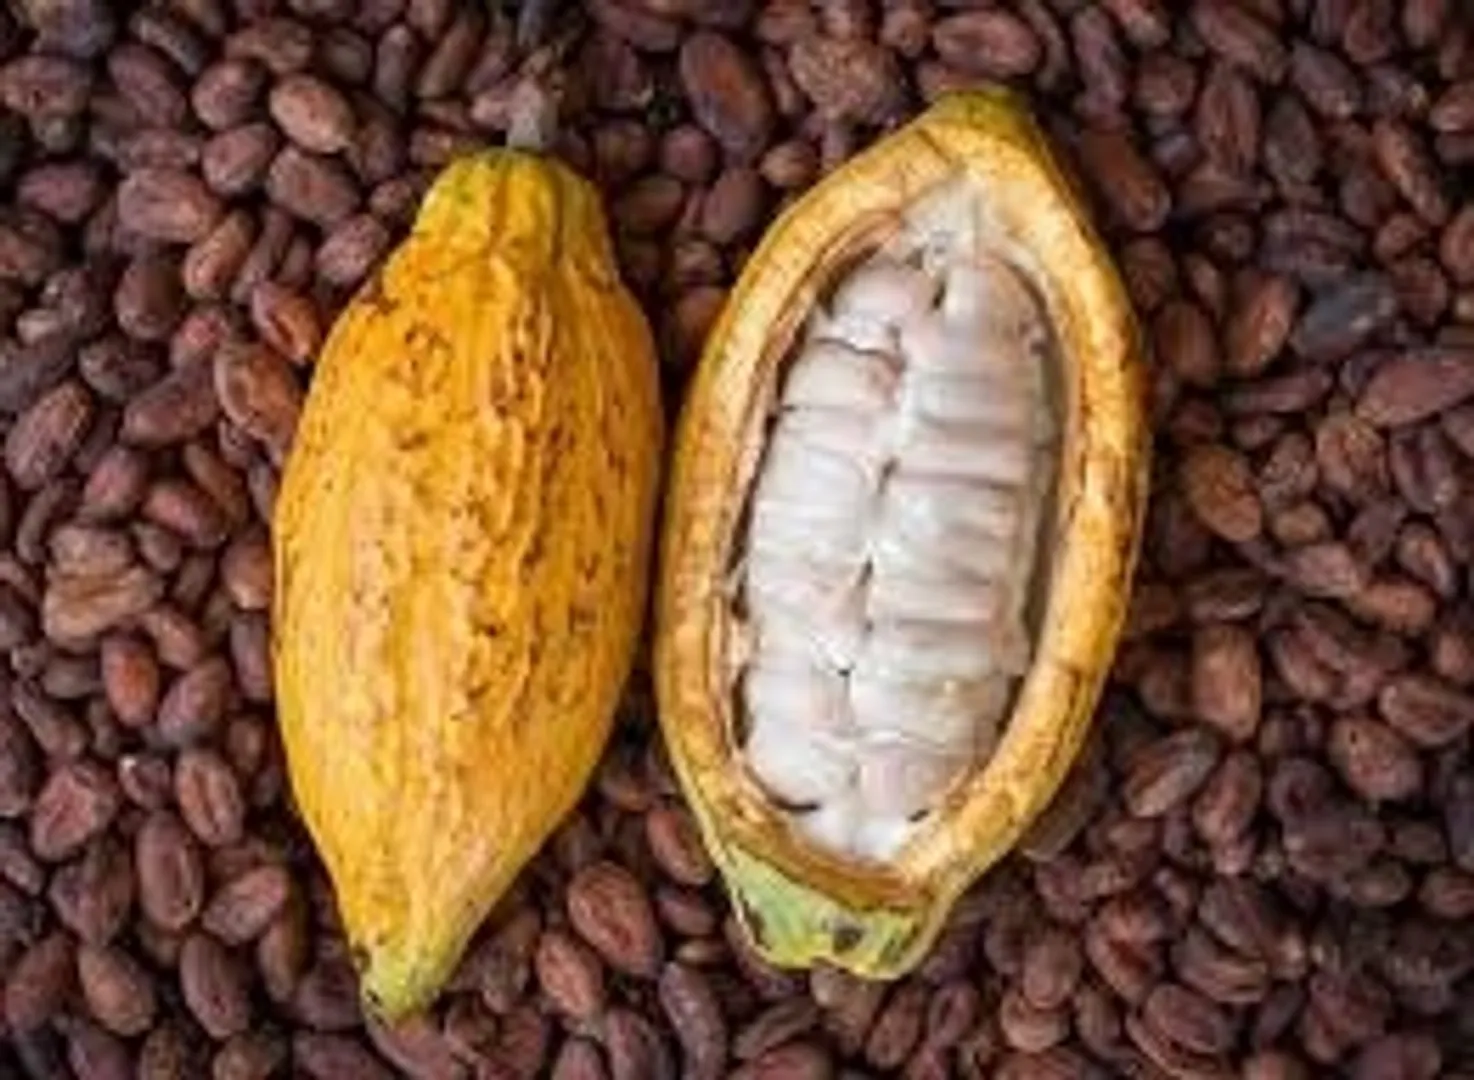 Hello,
 I am mandated by a young and dynamic agricultural cooperative in Ivory Coast which for its development, it is looking for business partners and especially exporters and buyers of large volumes of cocoa beans and coffee beans.  sturdy.
 The cooperative is located in the west of the Ivory Coast.

 I am making this announcement to solicit partners, exporters and buyers of cocoa beans and robusta coffee beans to work with this dynamic and promising cooperative.

 For any further information, please contact us at:
 Email: soumholding@gmail.com
 WhatsApp: +225 0706036342
 Telephone: +225 0706036342
                       +225 0153545920
 SOUM HOLDING.
 TRADING-INTERMEDIATION-SERVICE PROVIDER.

 Your Trusted Partner for SAFE Trading.